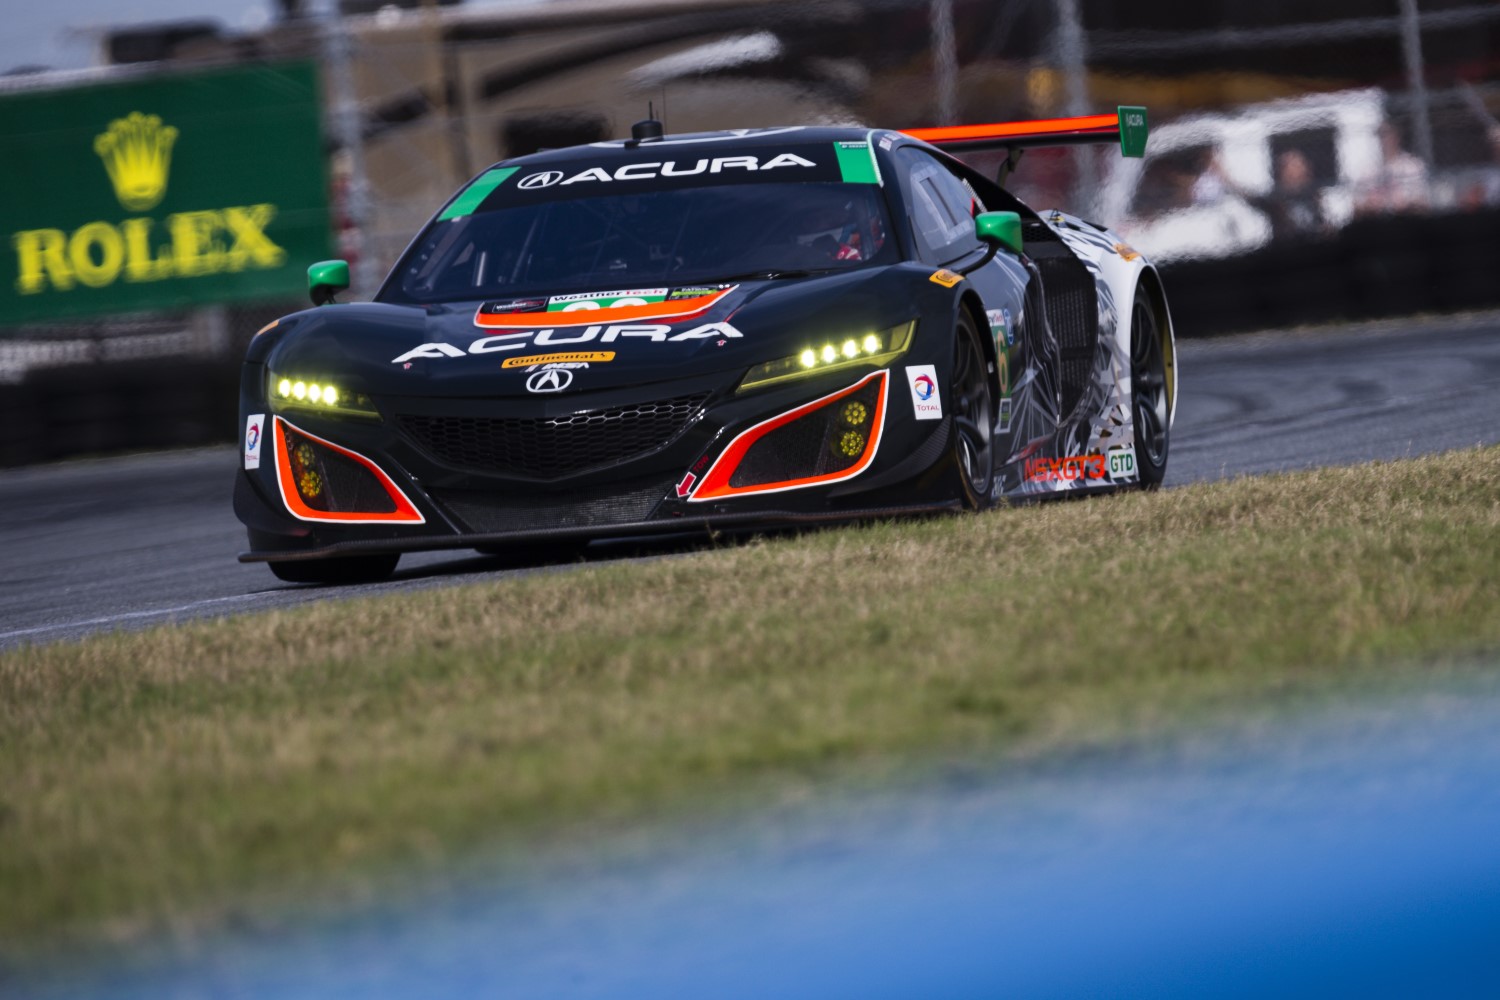 Hunter-Reay leads GTD in the #86 Acura